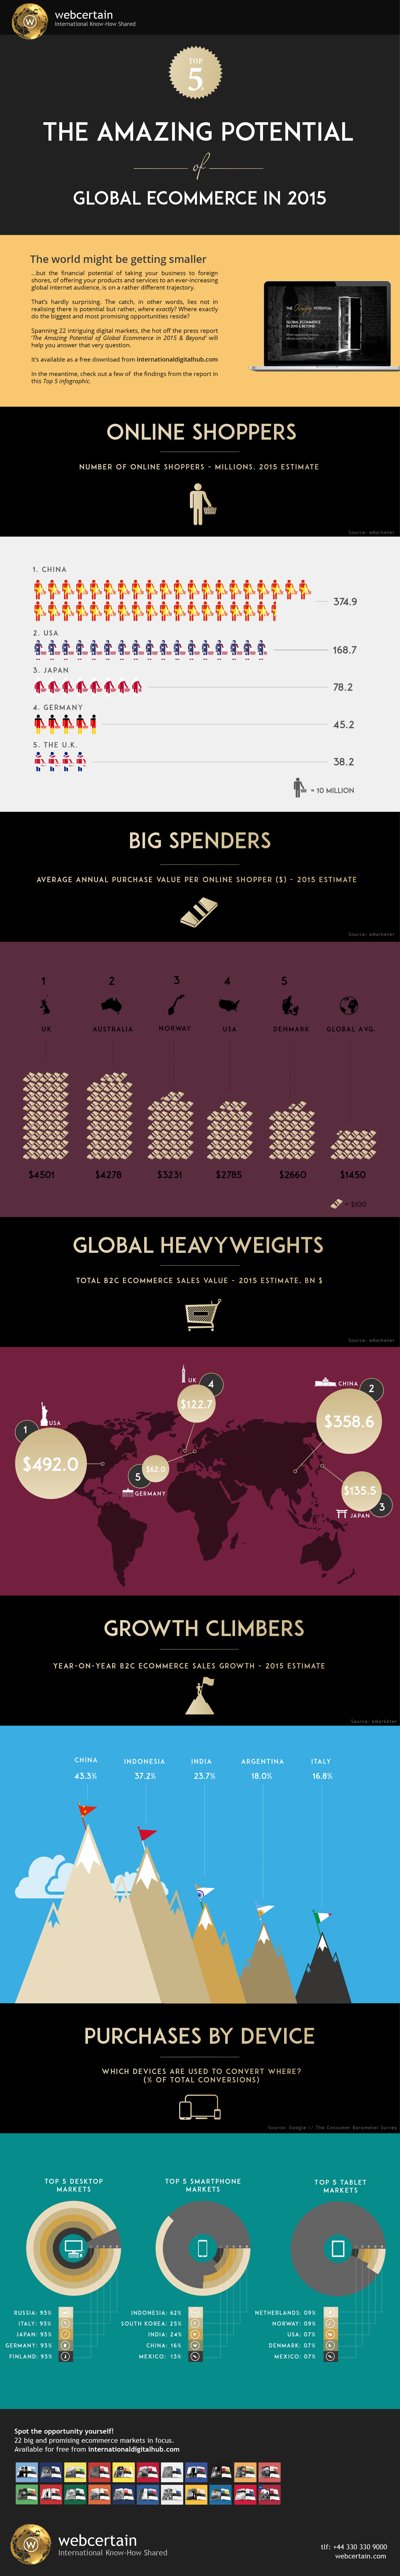 Global Ecommerce Infographic